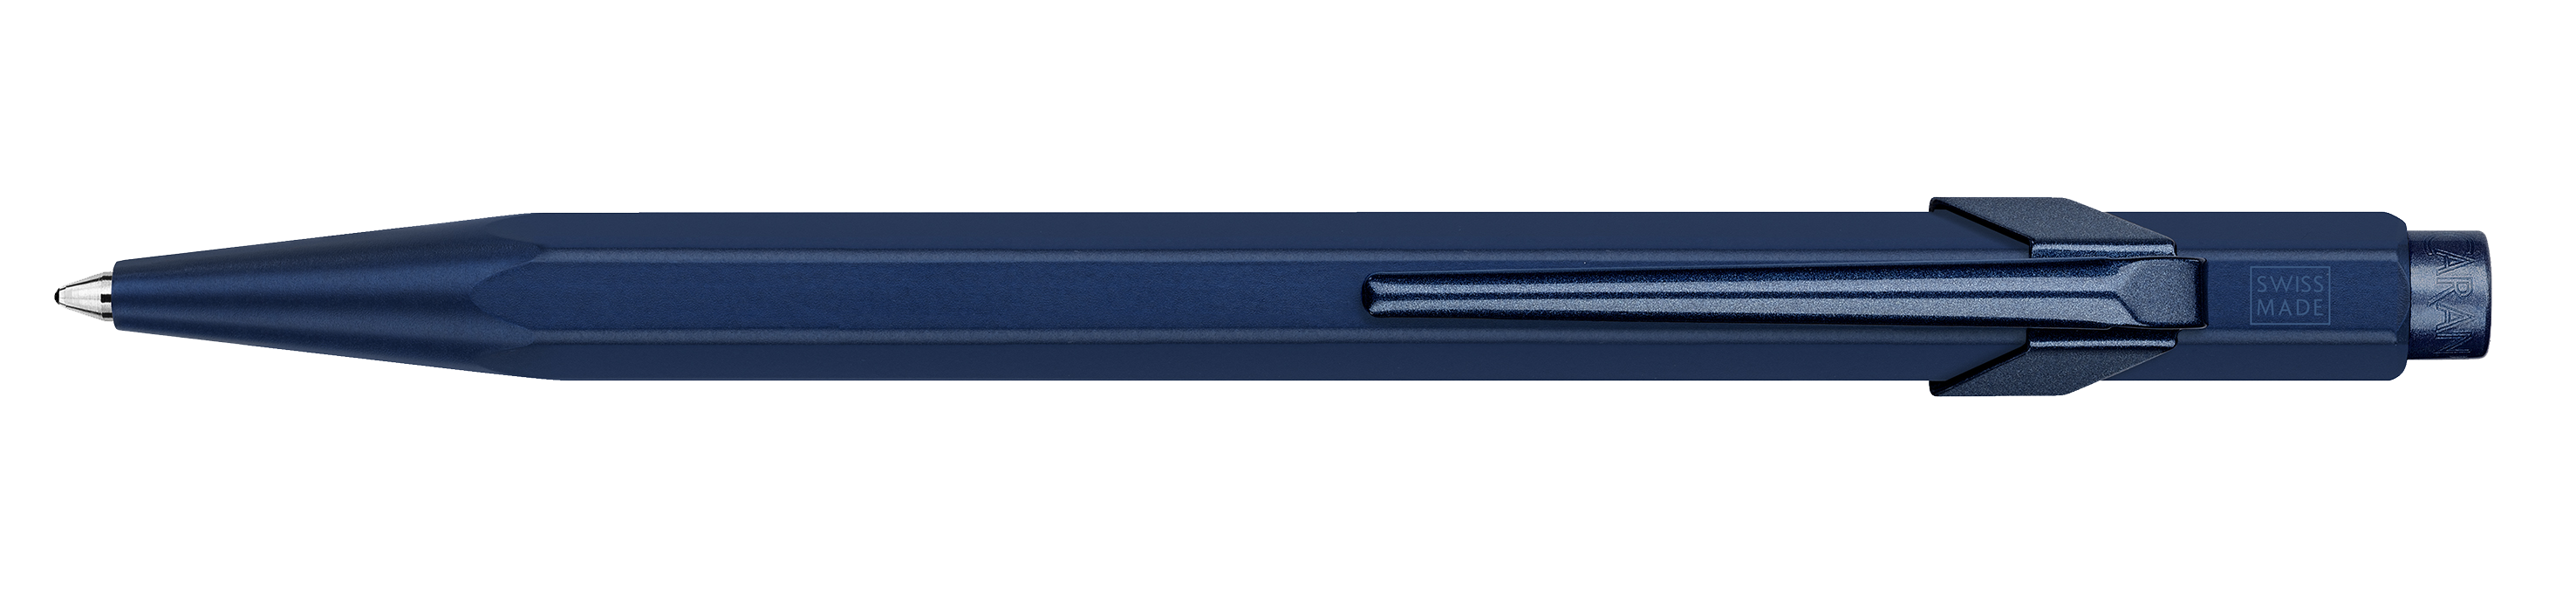 Caran d'Ache 849 Claim Your Style III Limited Edition Night Blue Ballpoint